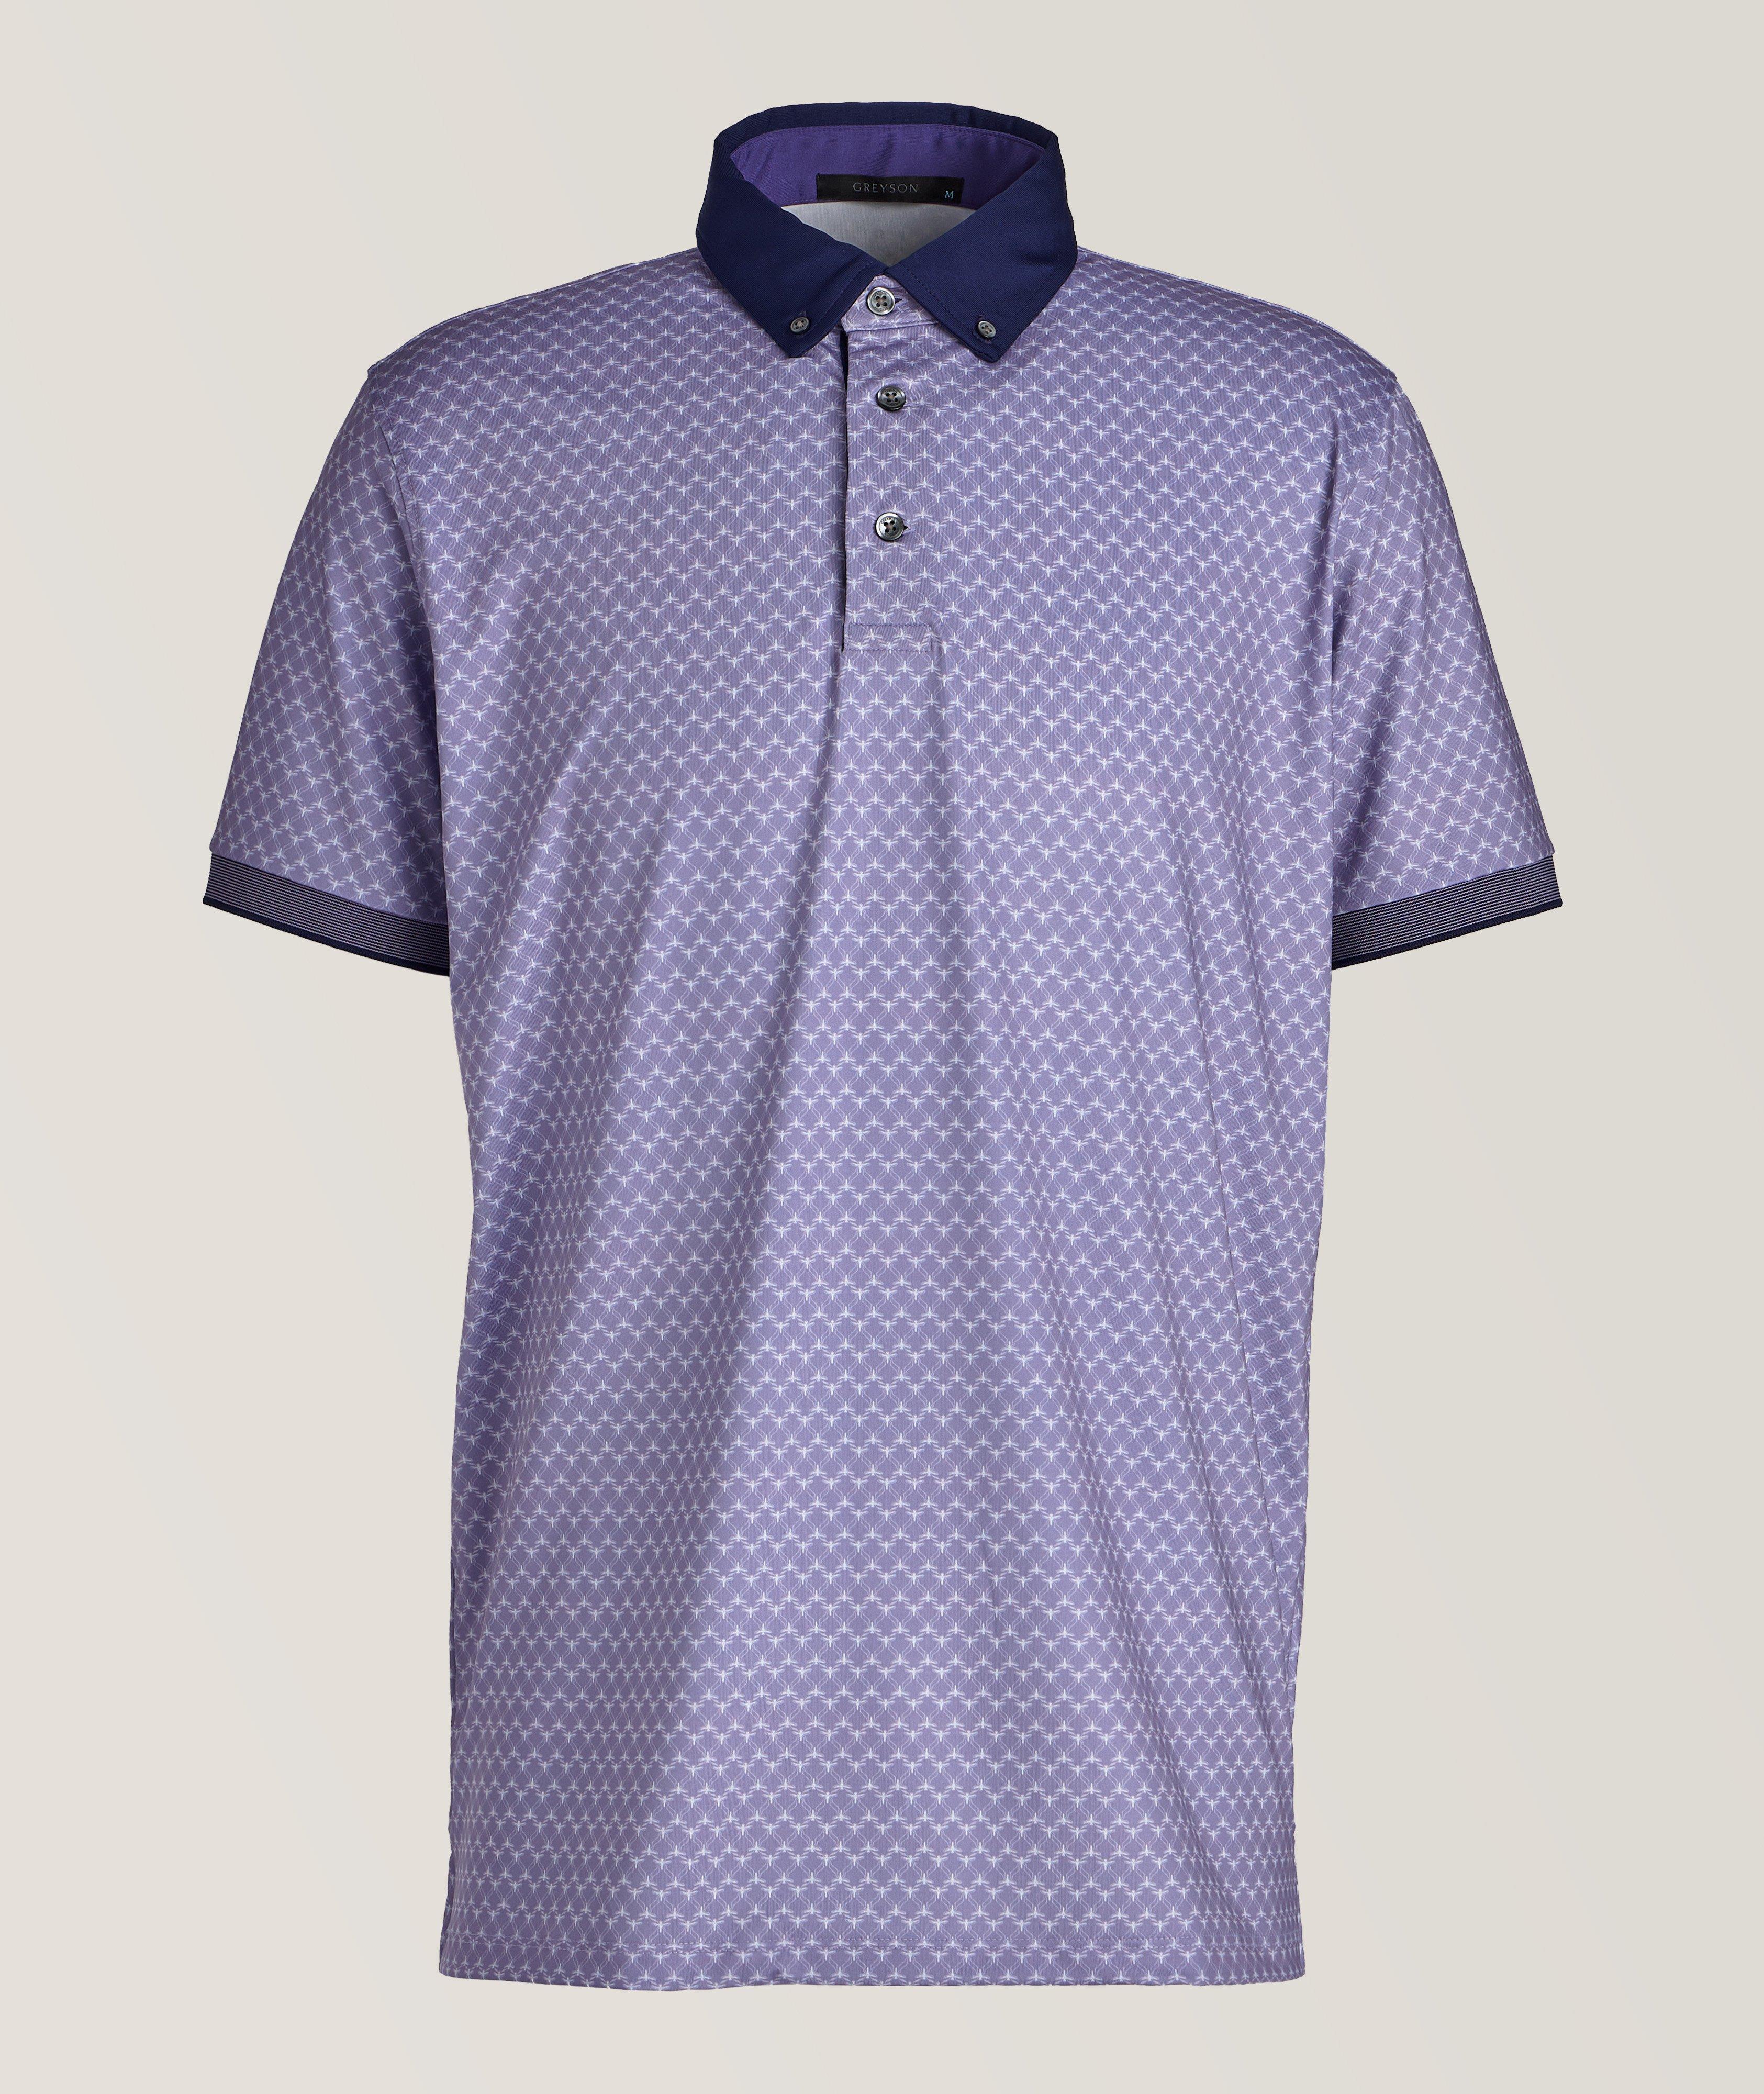 Players Club Mosquito Prophesies Golf Polo  image 0